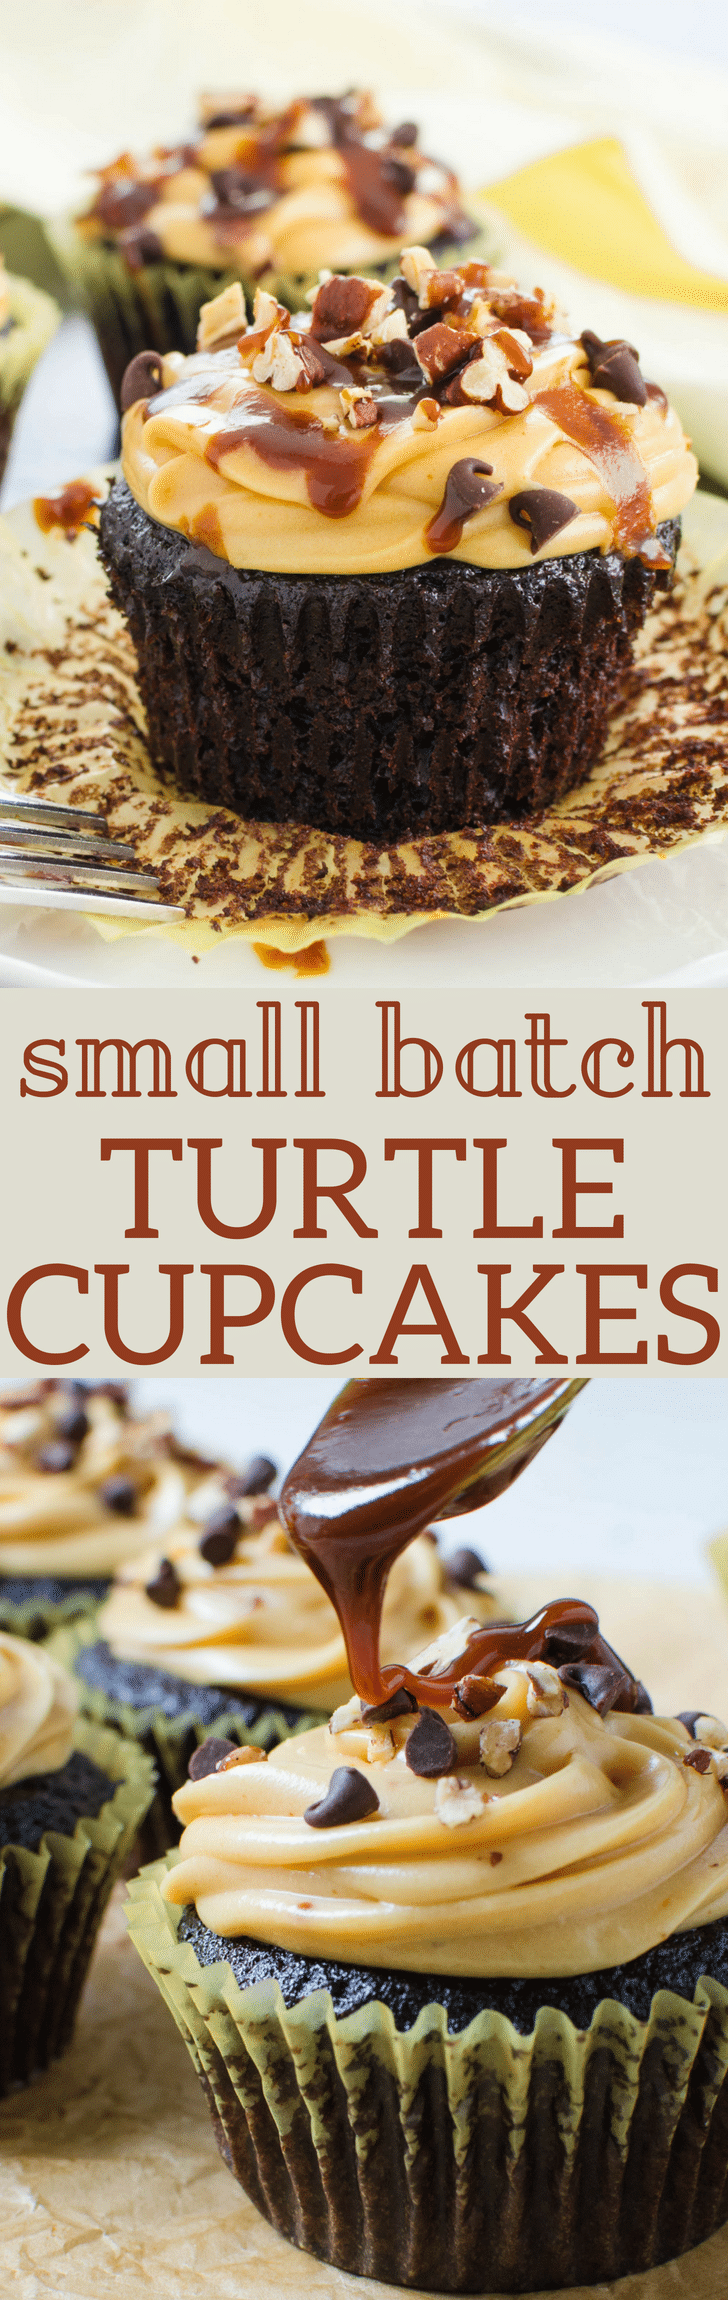 These small batch cupcakes are worth the effort, with Caramel Cream Cheese Frosting, chopped pecans, mini chips and caramel drizzle, these turtle cupcakes are great for small celebrations. Small batch turtle cupcakes recipe can be doubled or quadrupled to celebrate with a crowd, too! #cupcakes #smallbatch #smallbatchcupcakes #chocolatecupcakes #chocolate #caramel #pecans #caramelfrosting #creamcheesefrosting #turtlecake #turtlecupcake #chocolatecake #homemadecupcakes